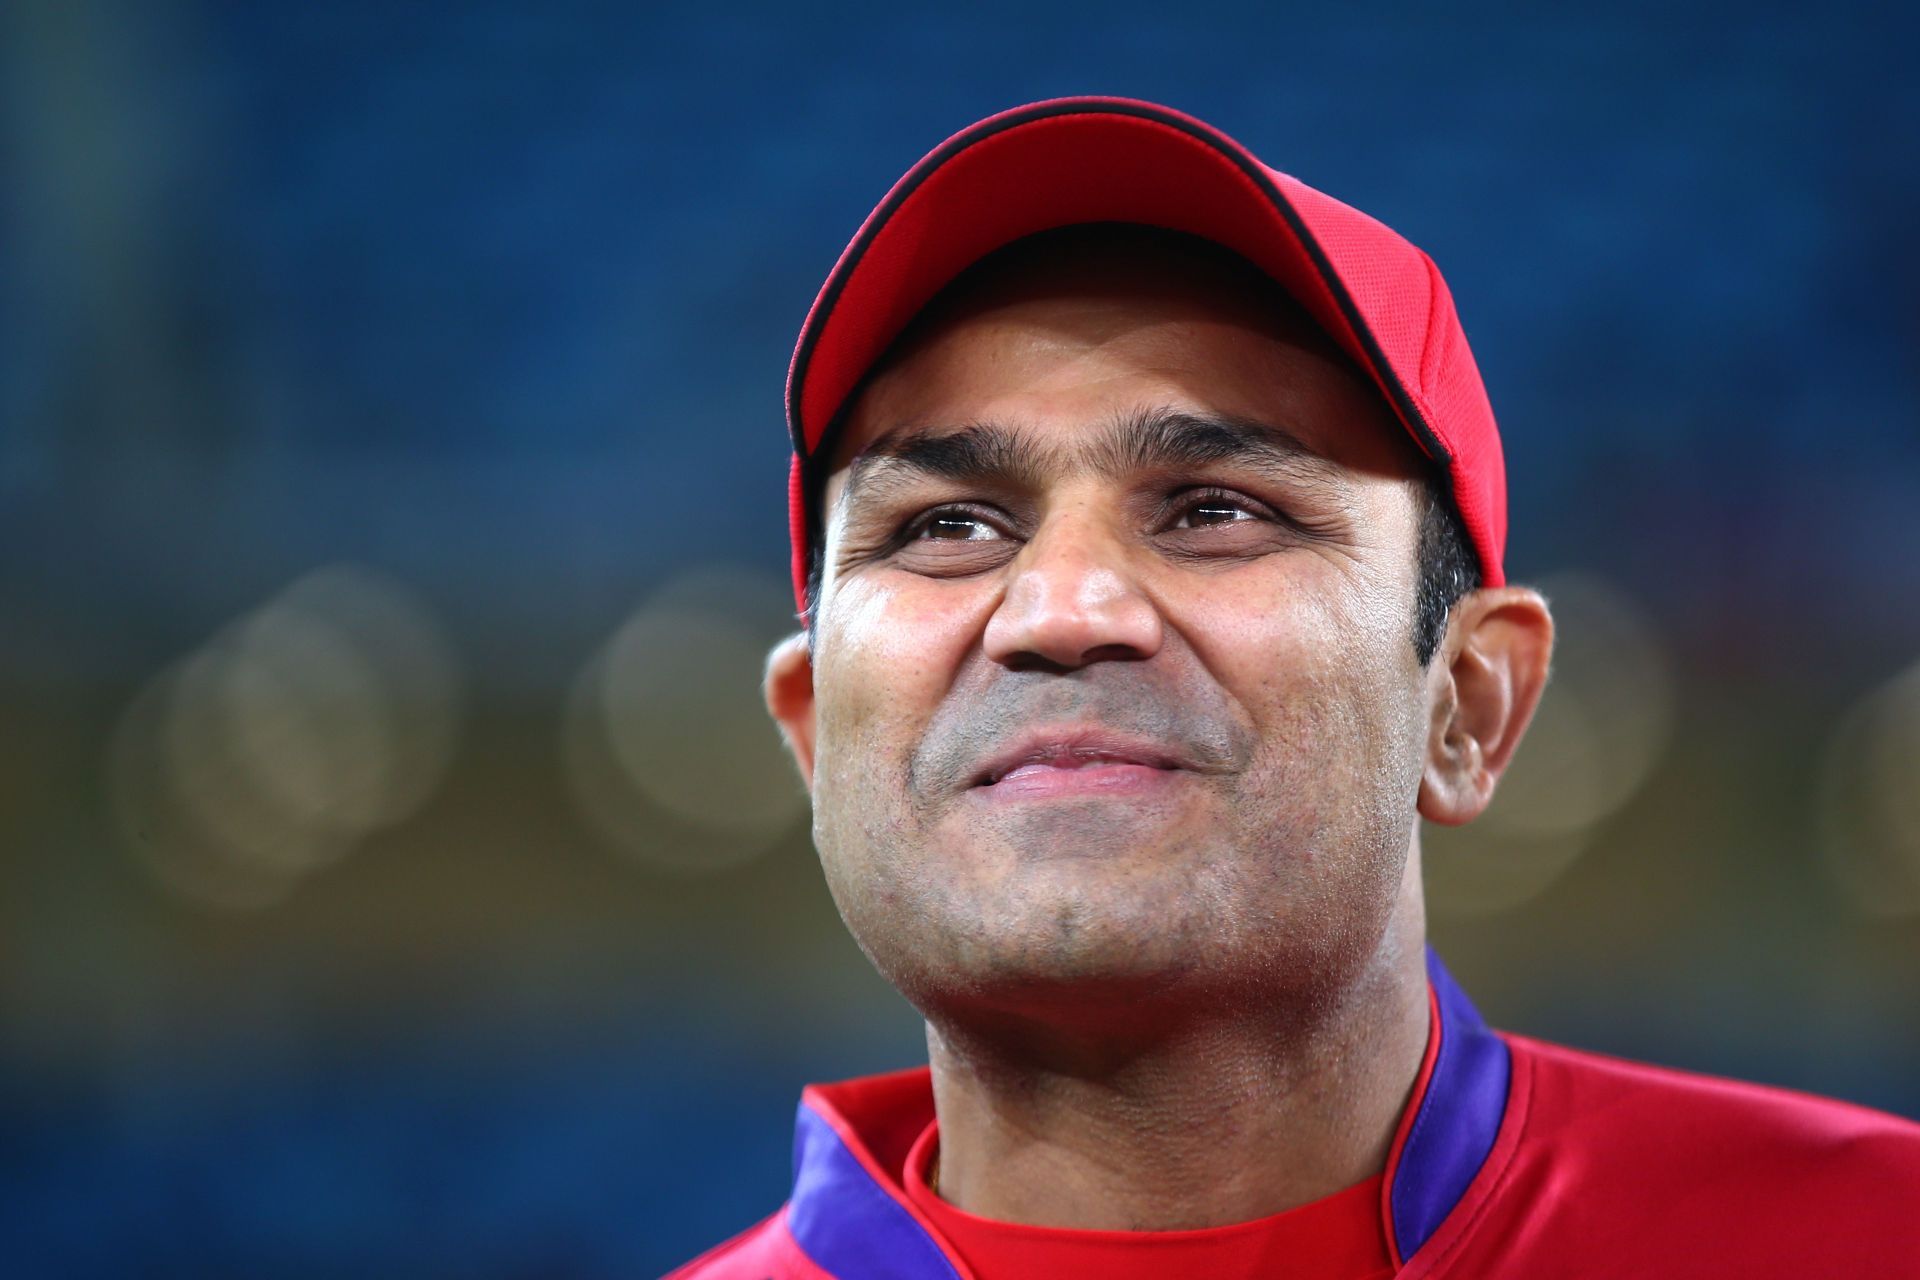 Virender Sehwag was one of the first players to confirm his participation for Legends League T20 2022 (Image: Getty)